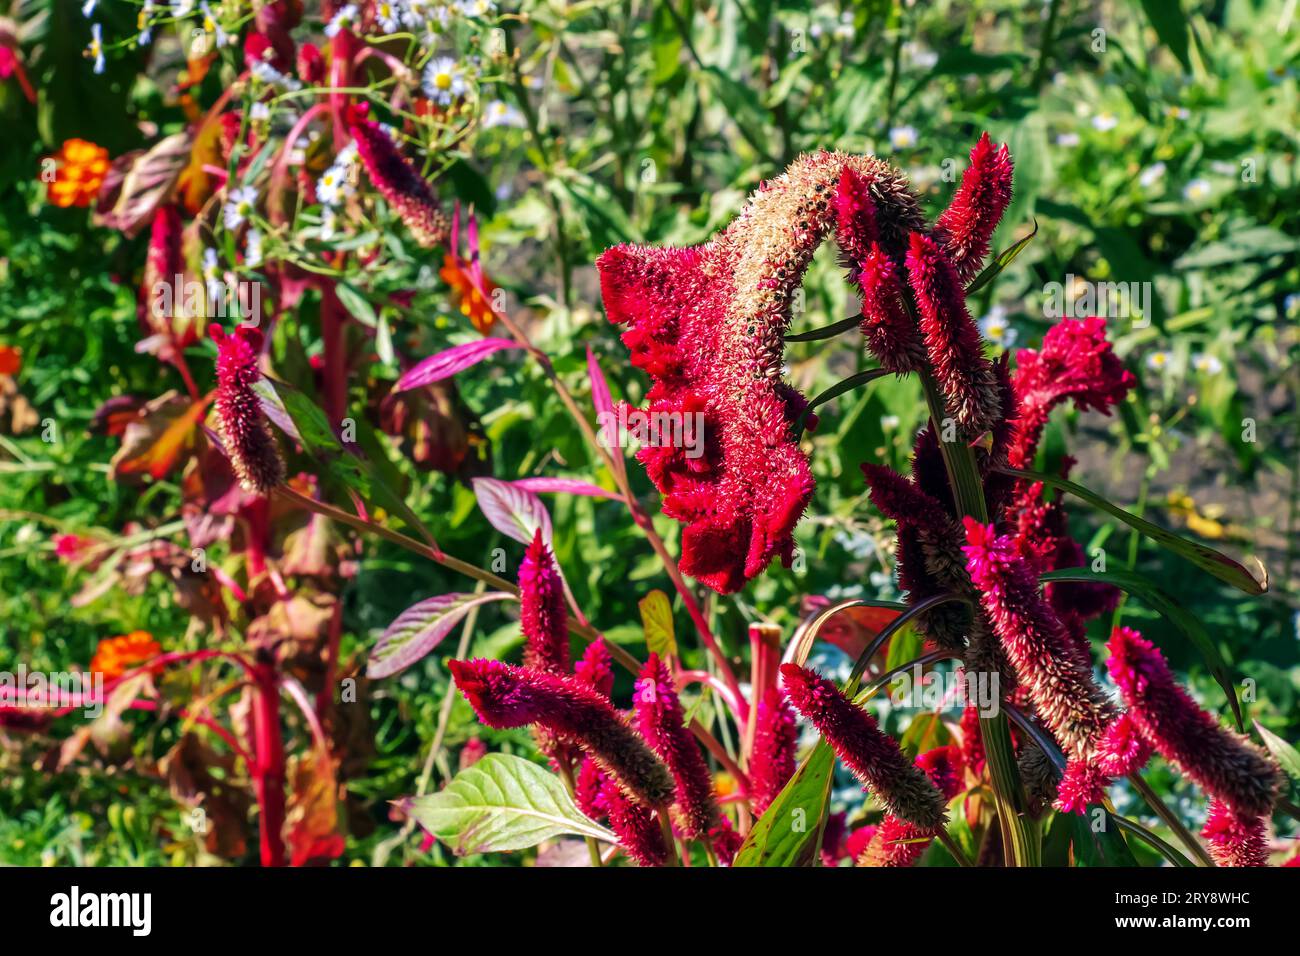 Crested Cockscomb Flower, scientifically known as Celosia argentea cristata have resemblance to a rooster's comb, featuring vibrant, crested, and ruff Stock Photo